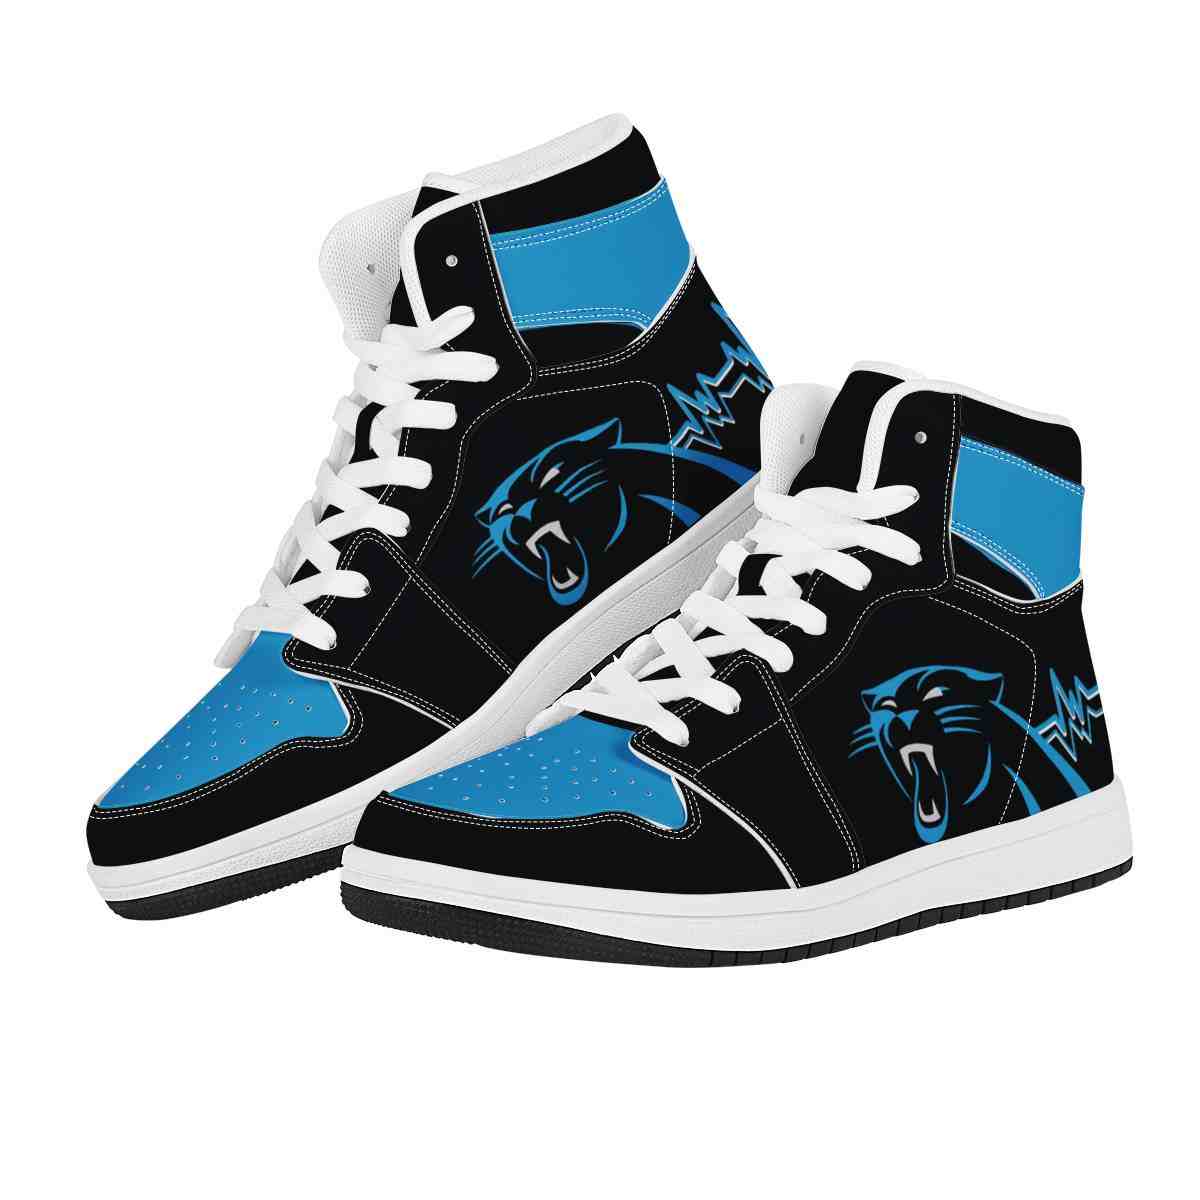 NFL Customized  shoes Carolina Panthers High Top Leather AJ1 Sneakers 001 Customized  shoes